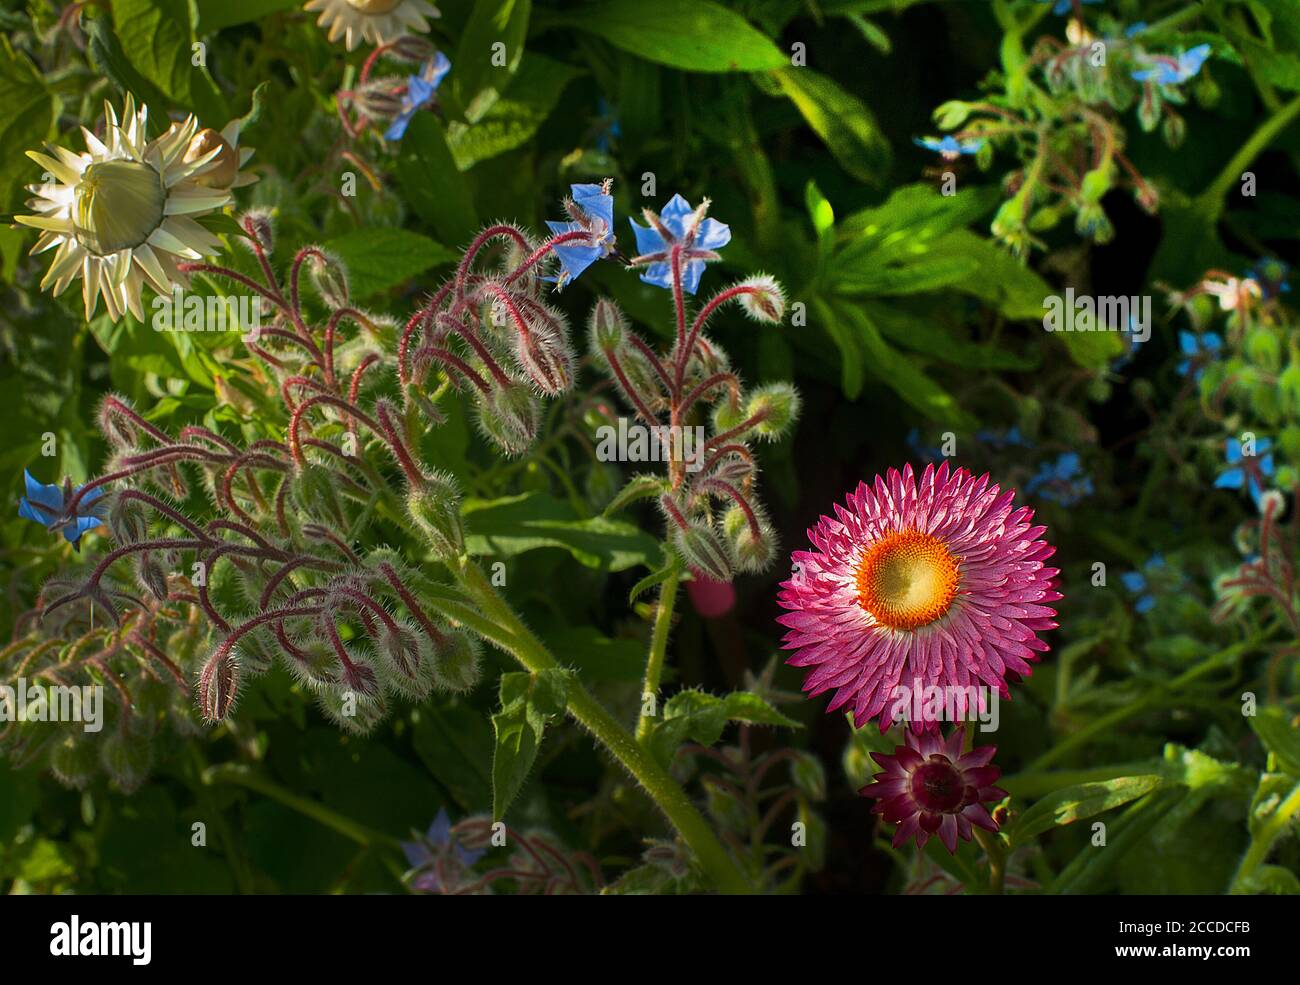 Aster and Anemone Flower In Fairy Like Grove Stock Photo